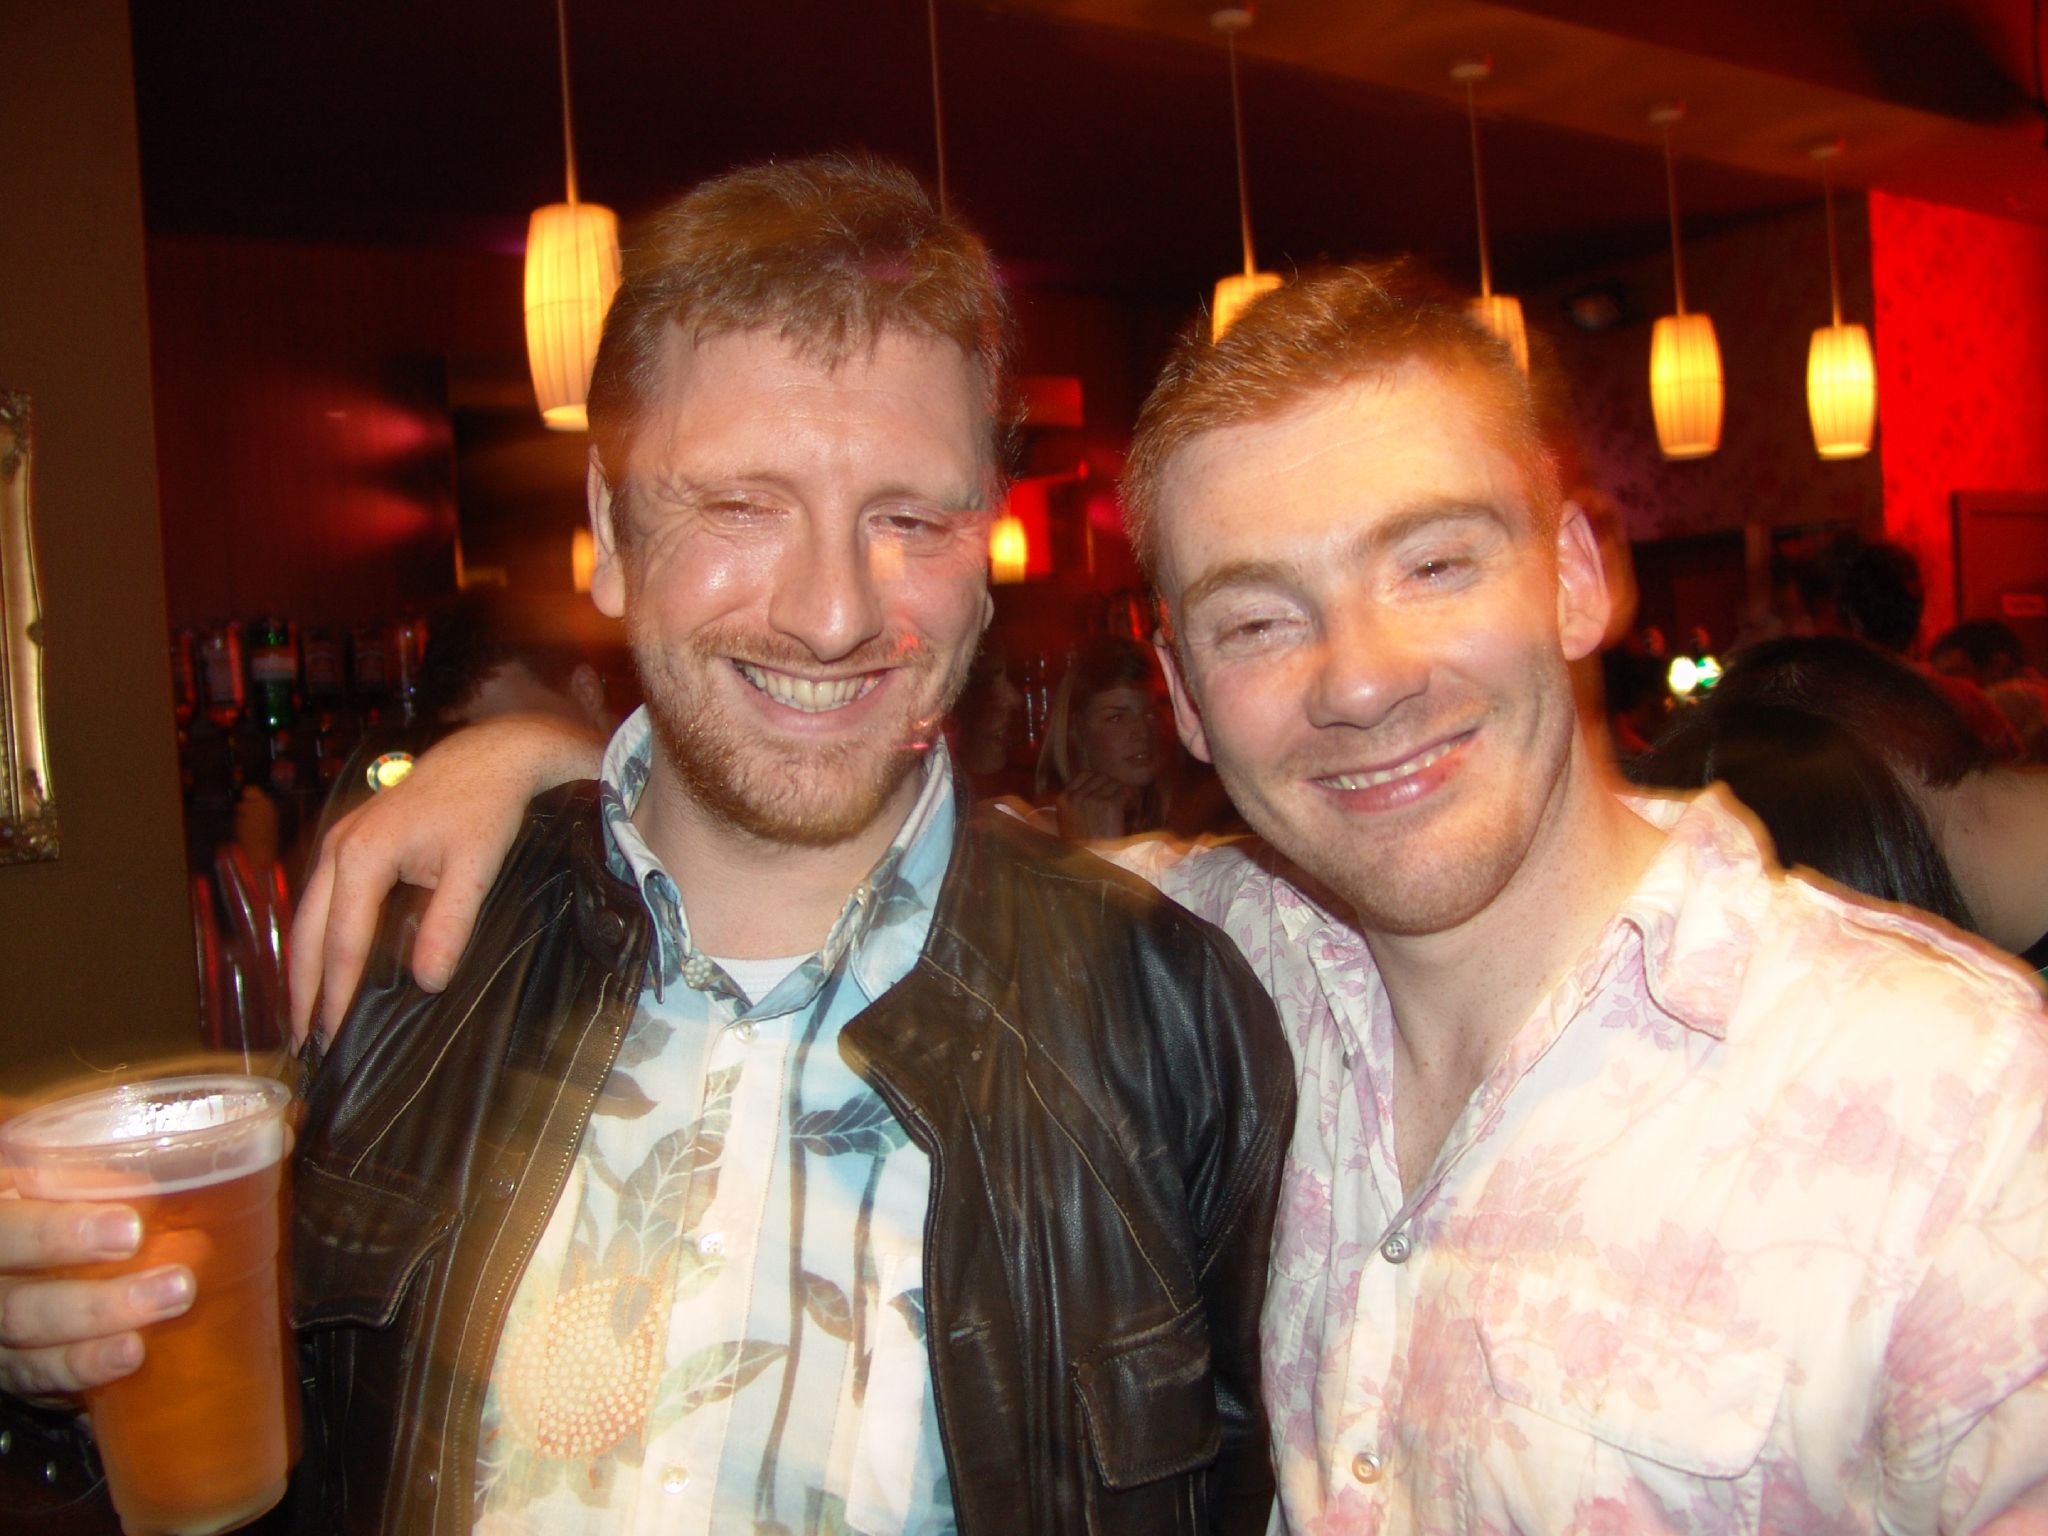 two men pose for a picture together at a party